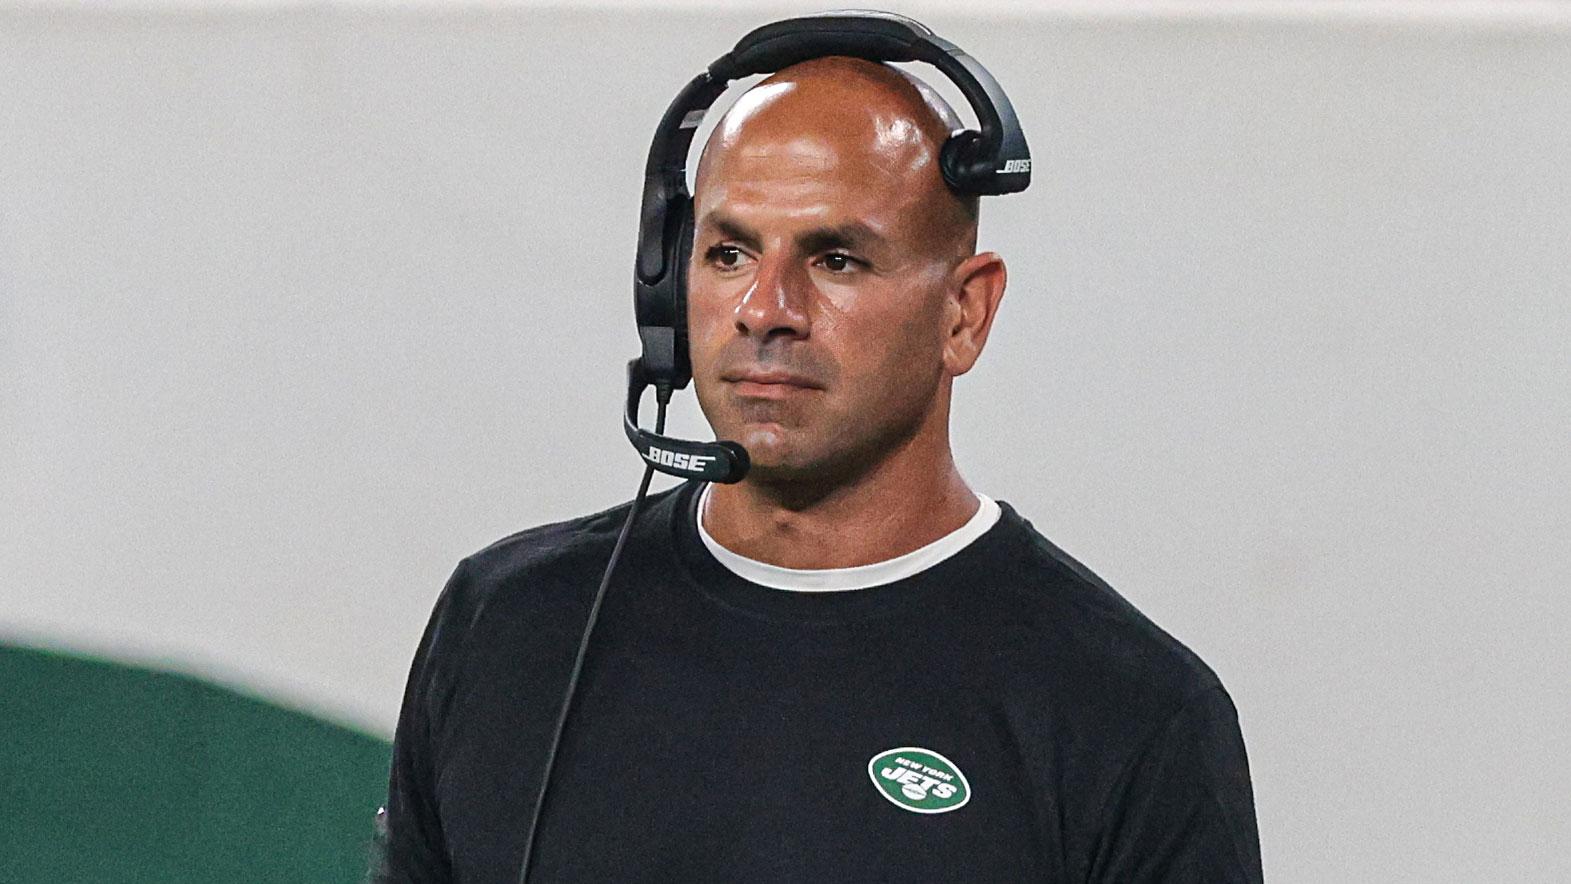 Aug 27, 2021; East Rutherford, New Jersey, USA; New York Jets head coach Robert Saleh looks on against the Philadelphia Eagles during the first half at MetLife Stadium. / Vincent Carchietta-USA TODAY Sports